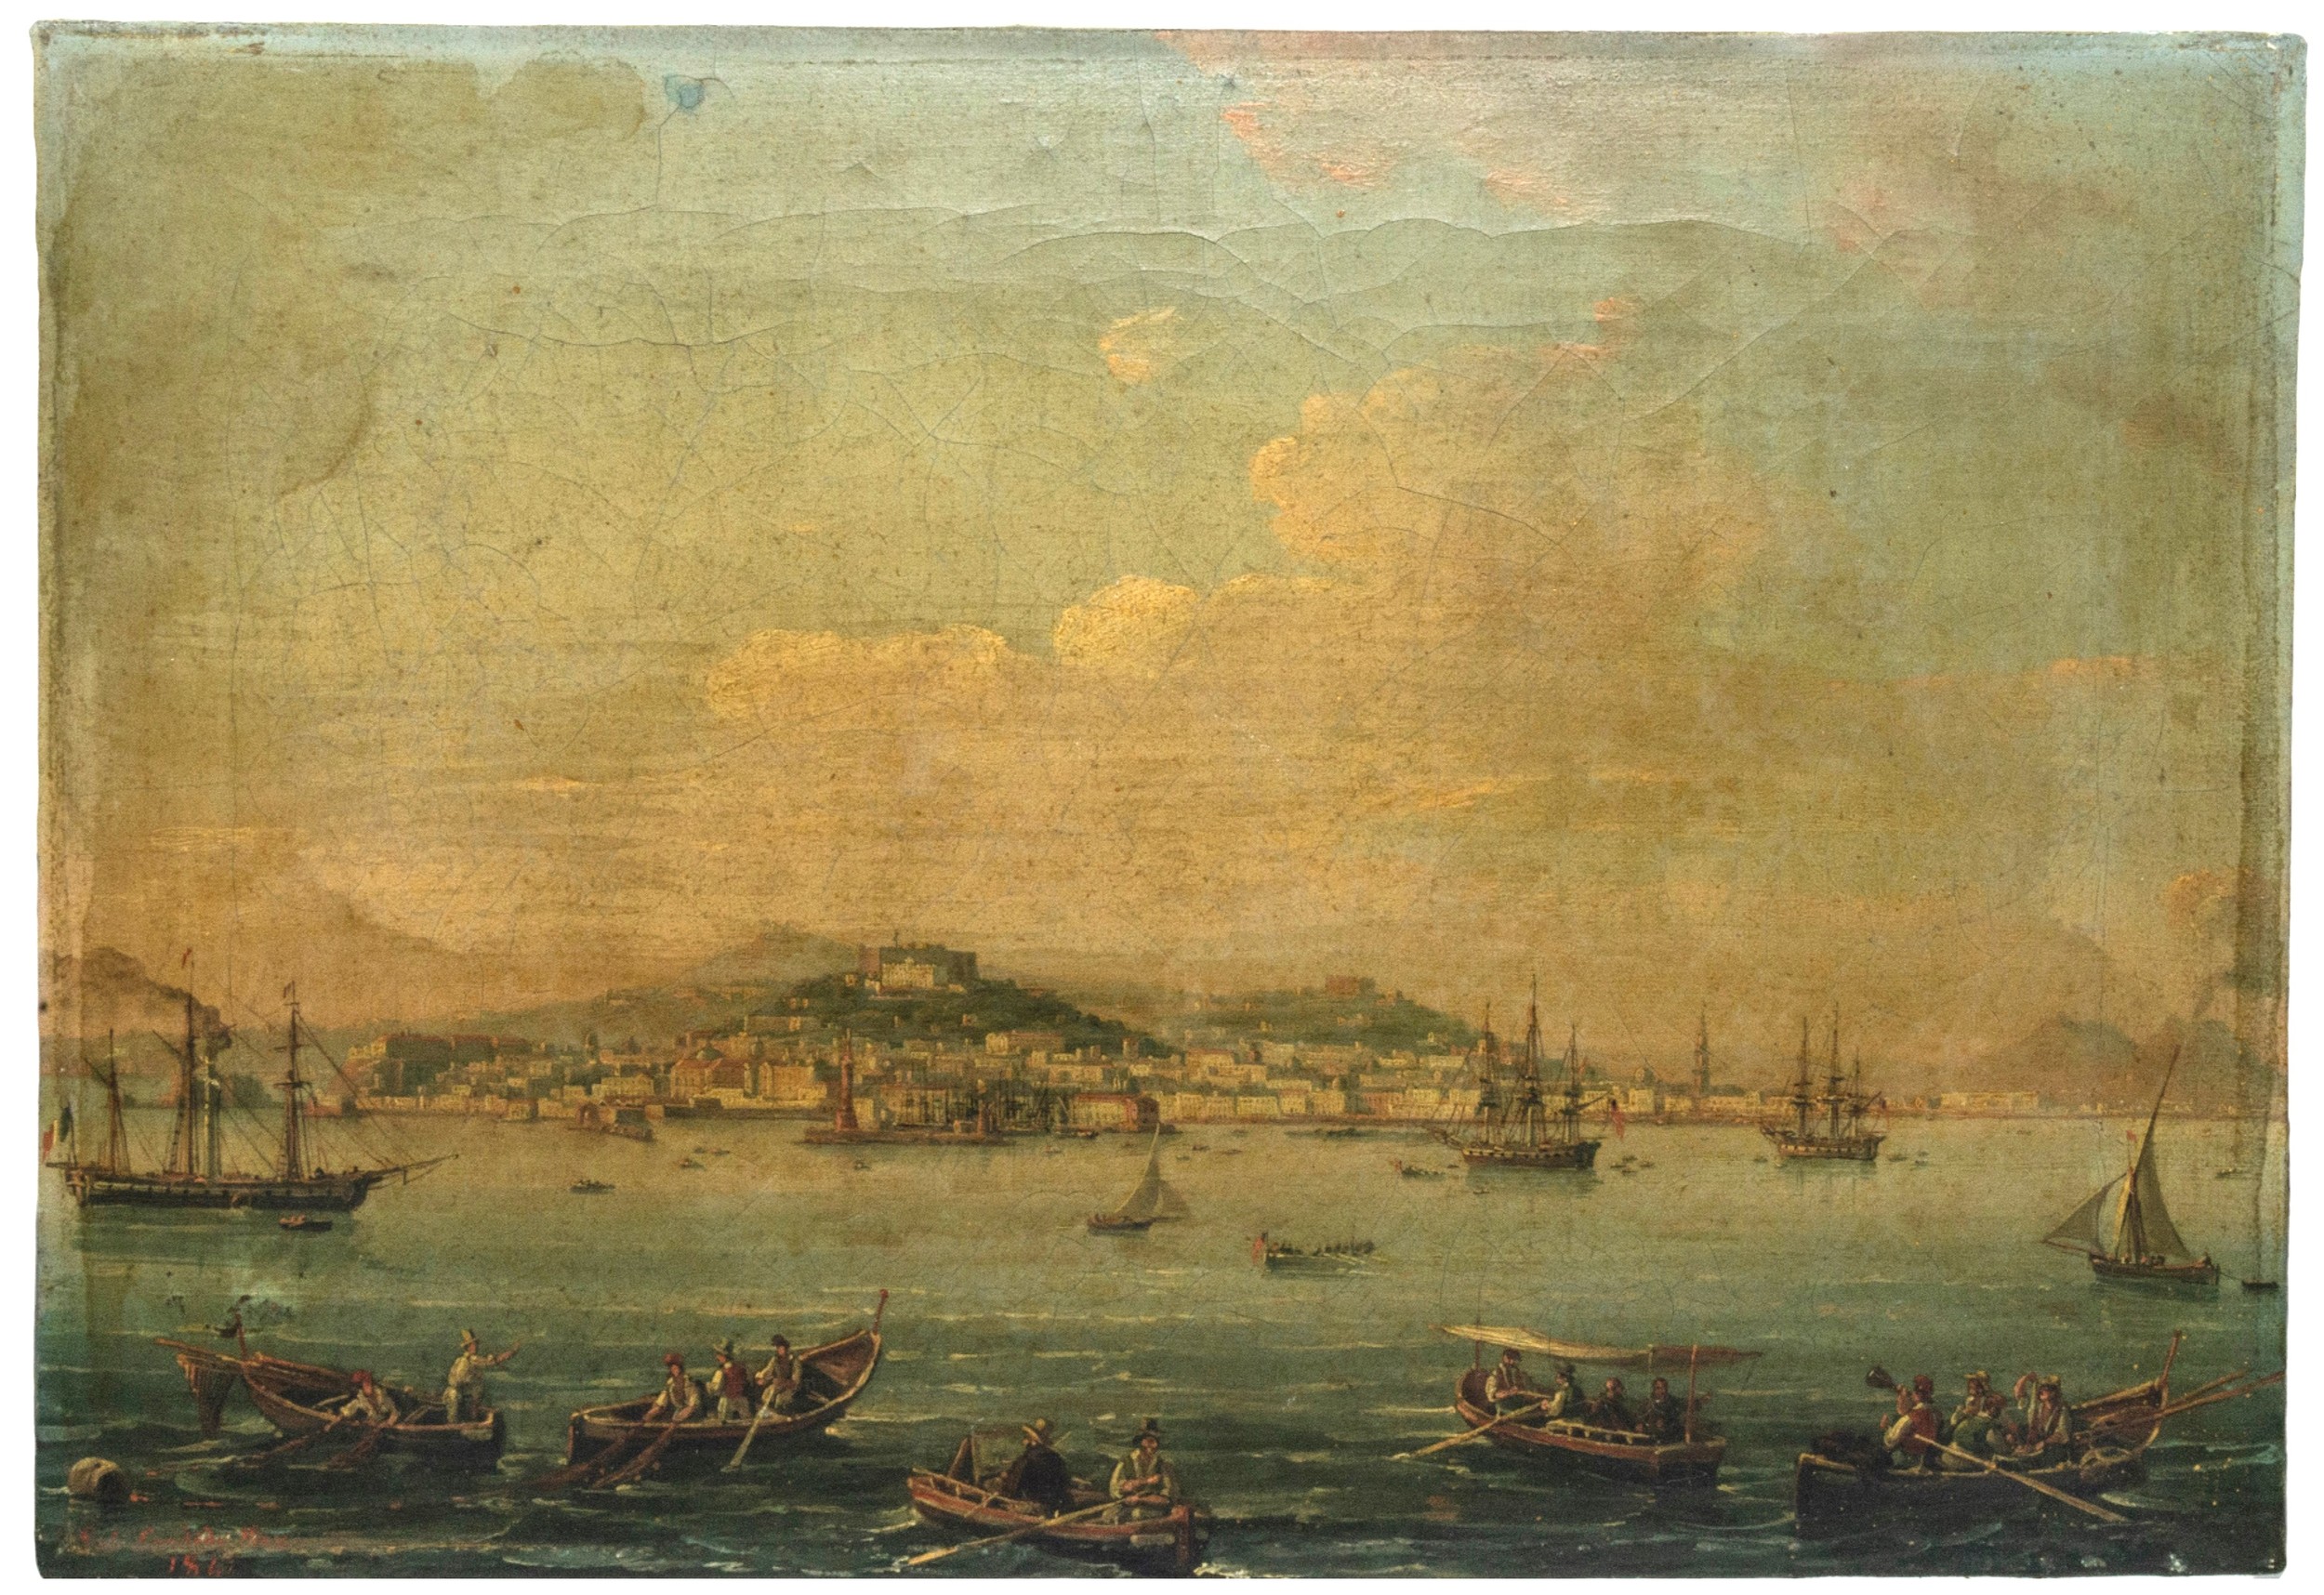 SALVATORE CANDIDO (act. 1823-1869) OIL PAINTING ON CANVAS OF THE BAY OF NAPLES, depicting an array